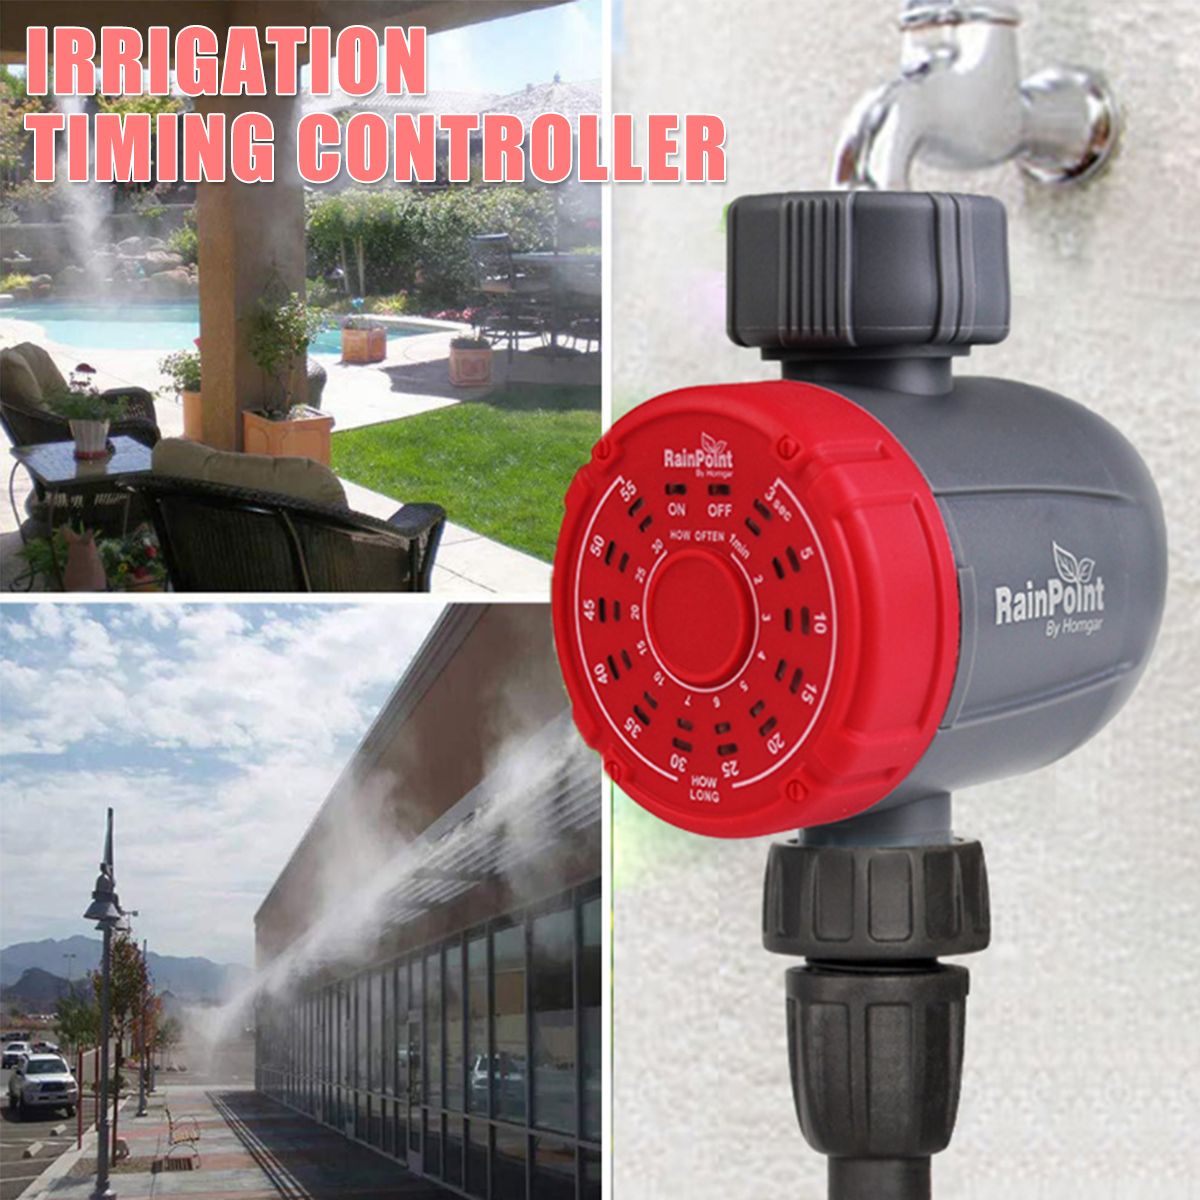 Automatic-Irrigation-Timer-Garden-Electronic-Watering-Tap-Controller-System-1596436